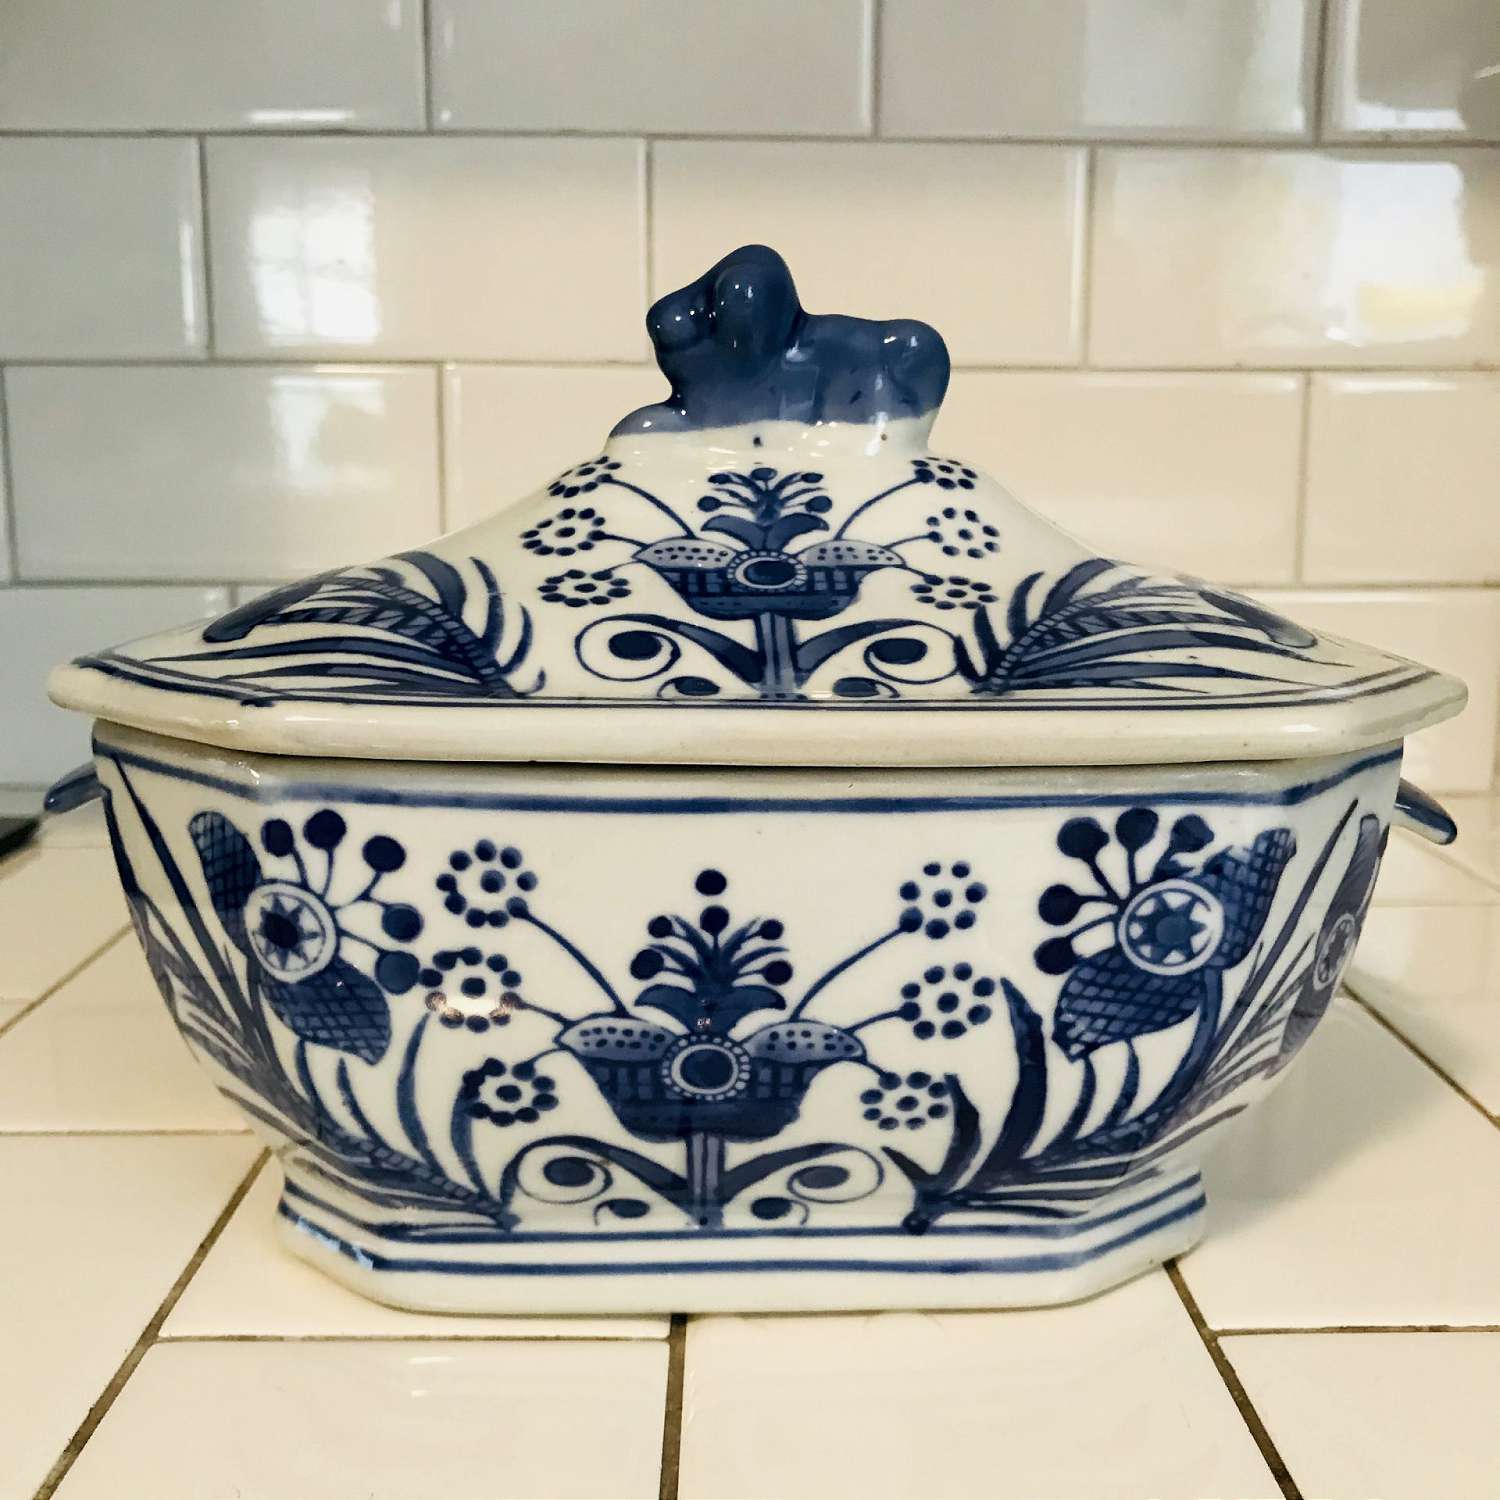 https://www.truevintageantiques.com/wp-content/uploads/2019/12/vintage-casserole-dish-lion-finial-covered-blue-and-white-porcelain-kitchen-display-collectible-farmhouse-folk-art-design-5dfb86bb7-scaled.jpg